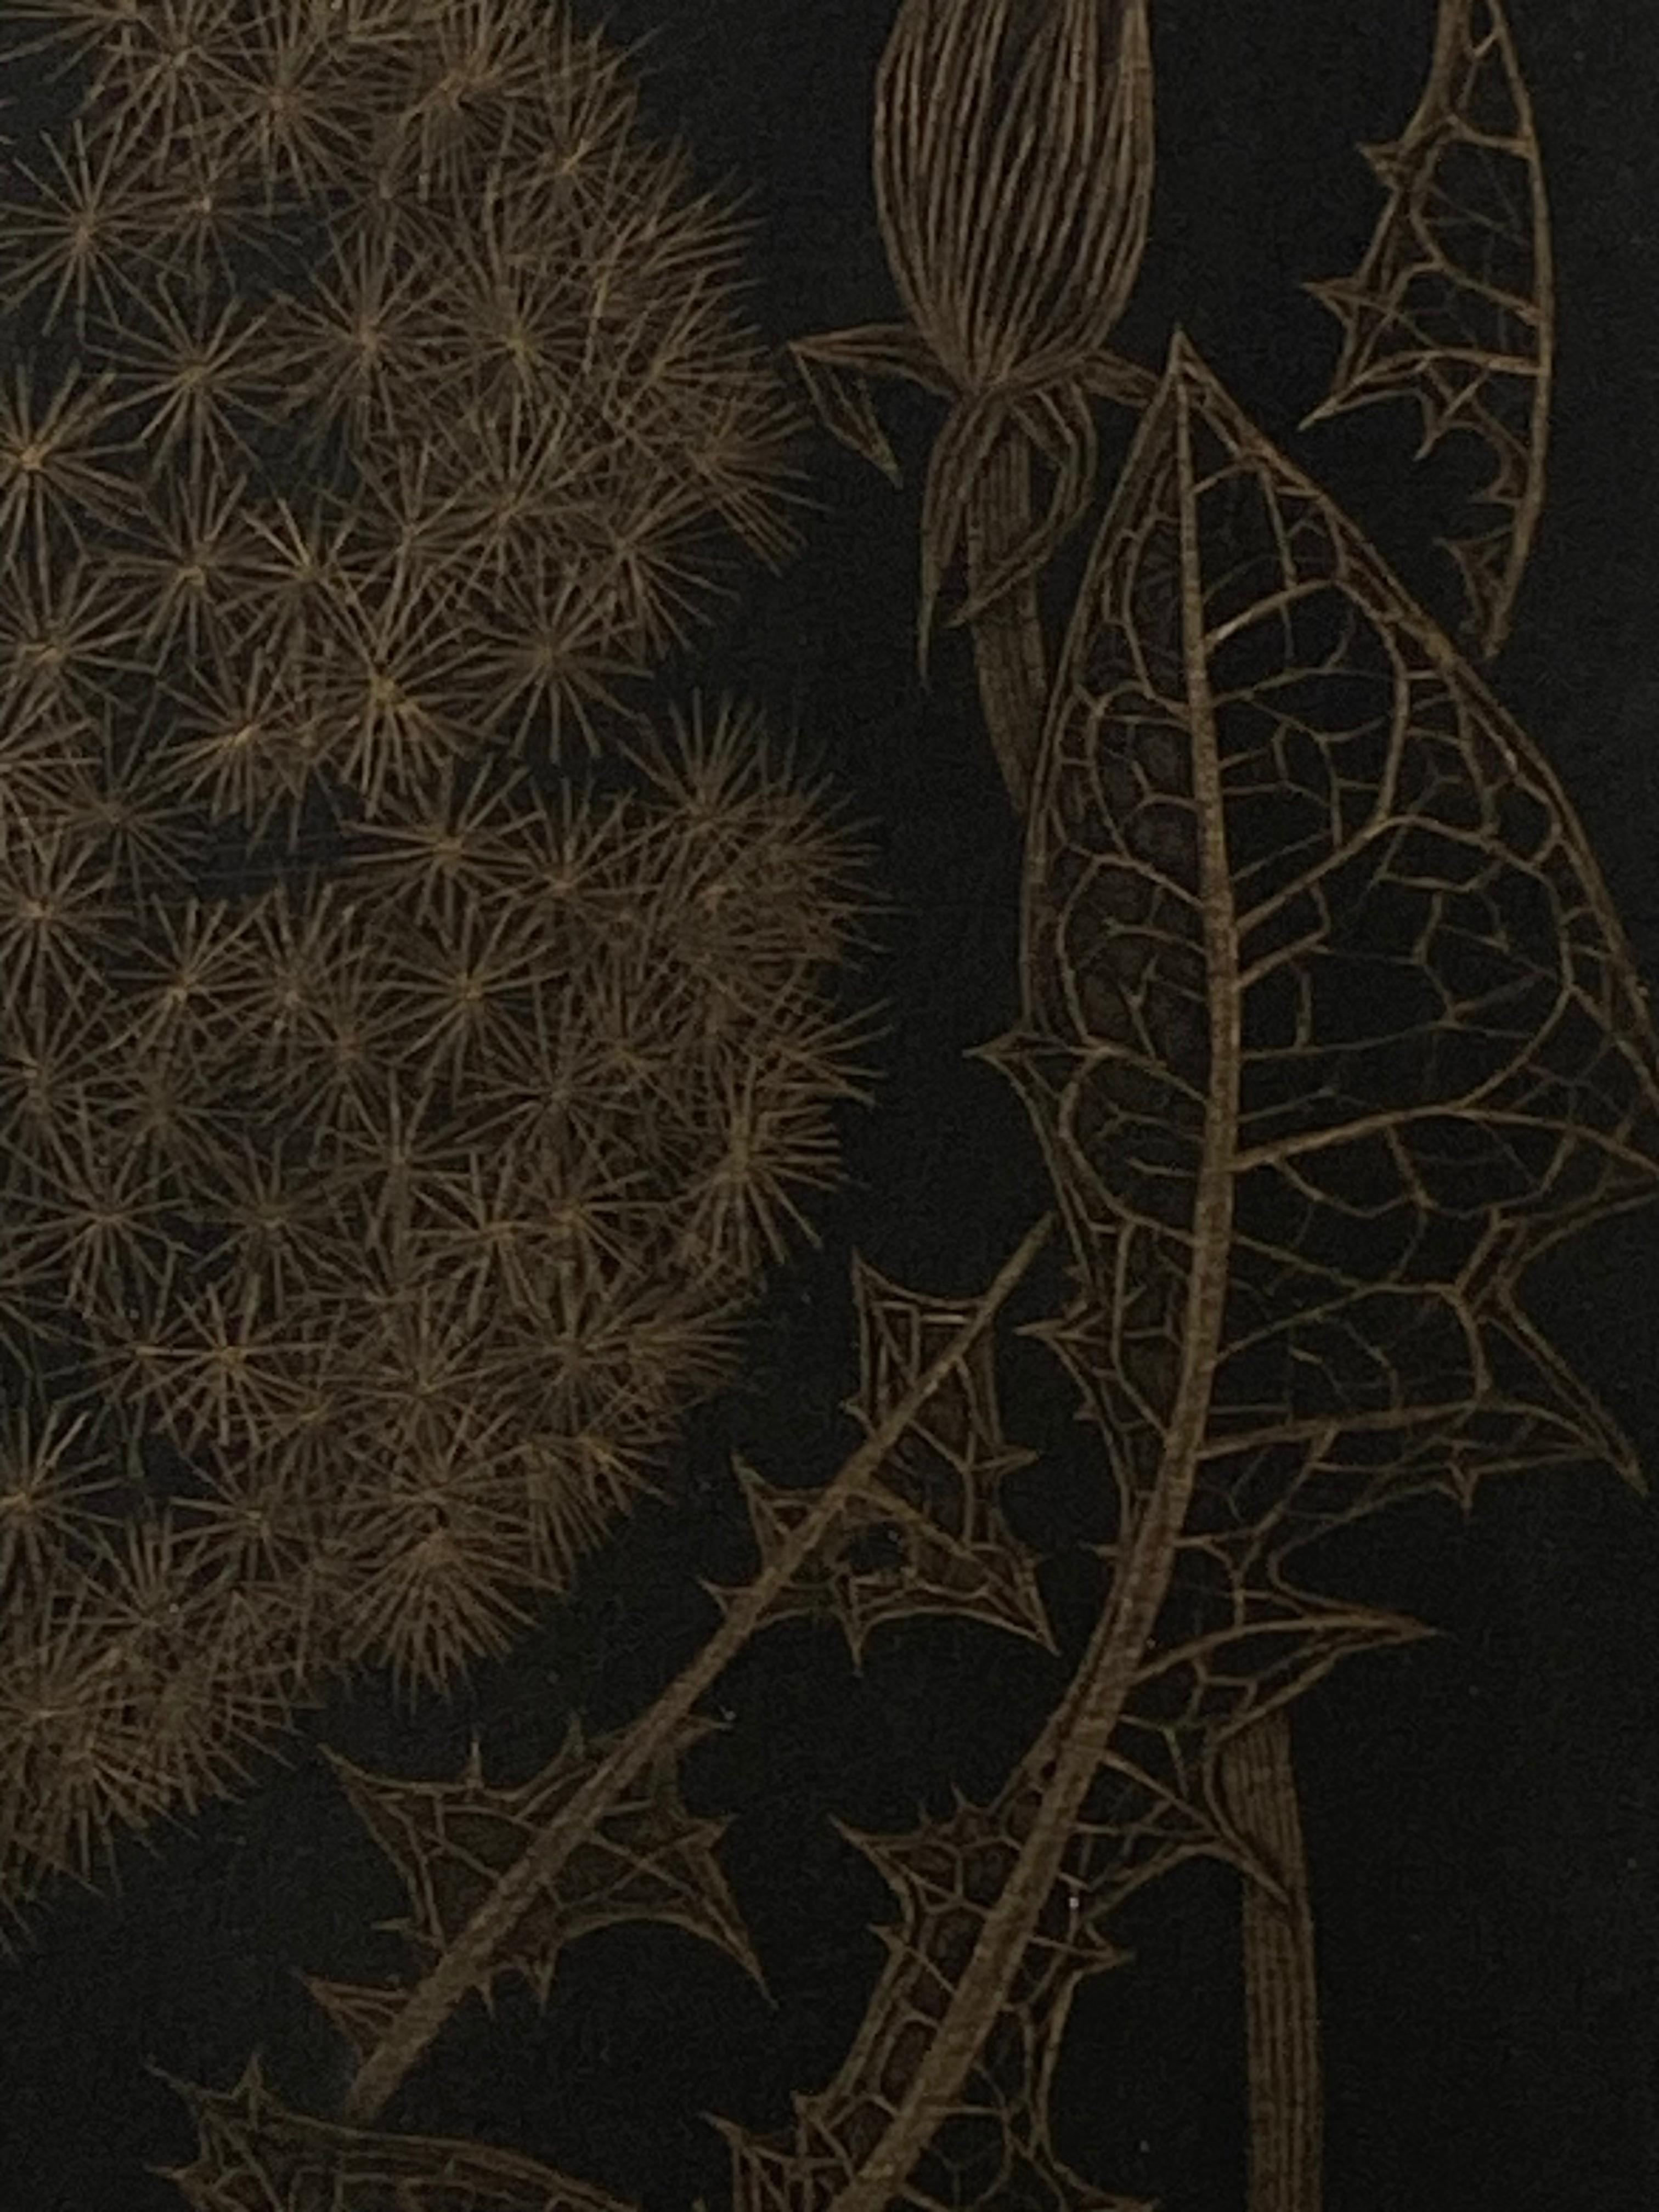 Dandelion with Two Buds, Botanical Drawing on Black Paper Made With 14K Gold 4